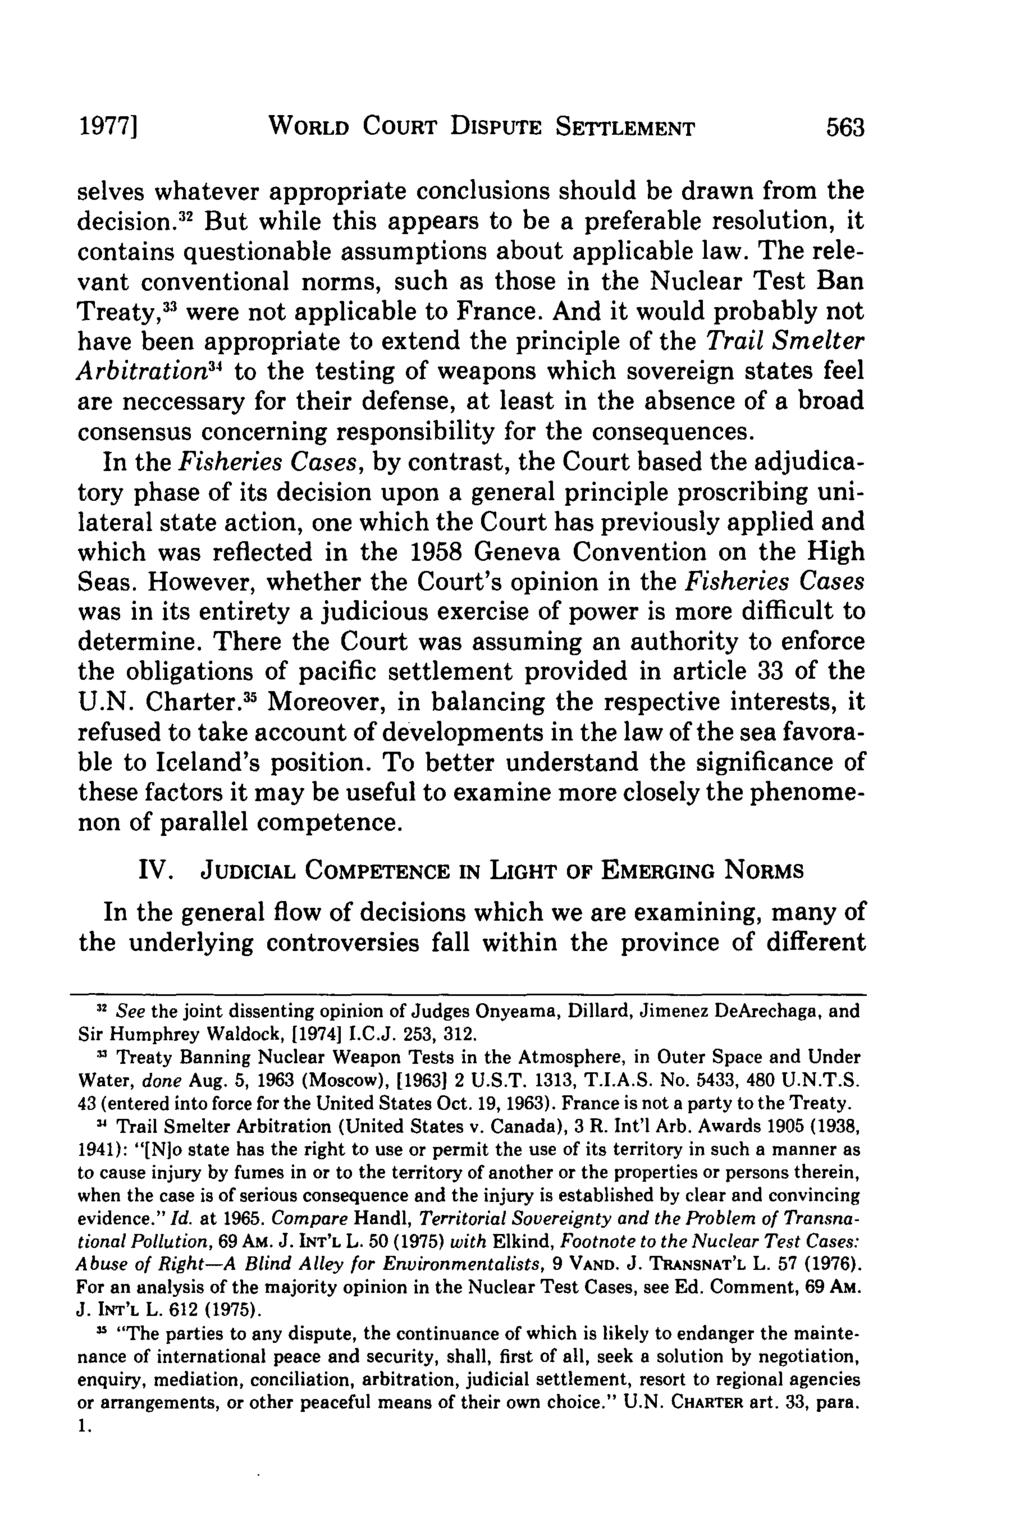 1977] WORLD COURT DISPUTE SETTLEMENT selves whatever appropriate conclusions should be drawn from the decision2 2 But while this appears to be a preferable resolution, it contains questionable